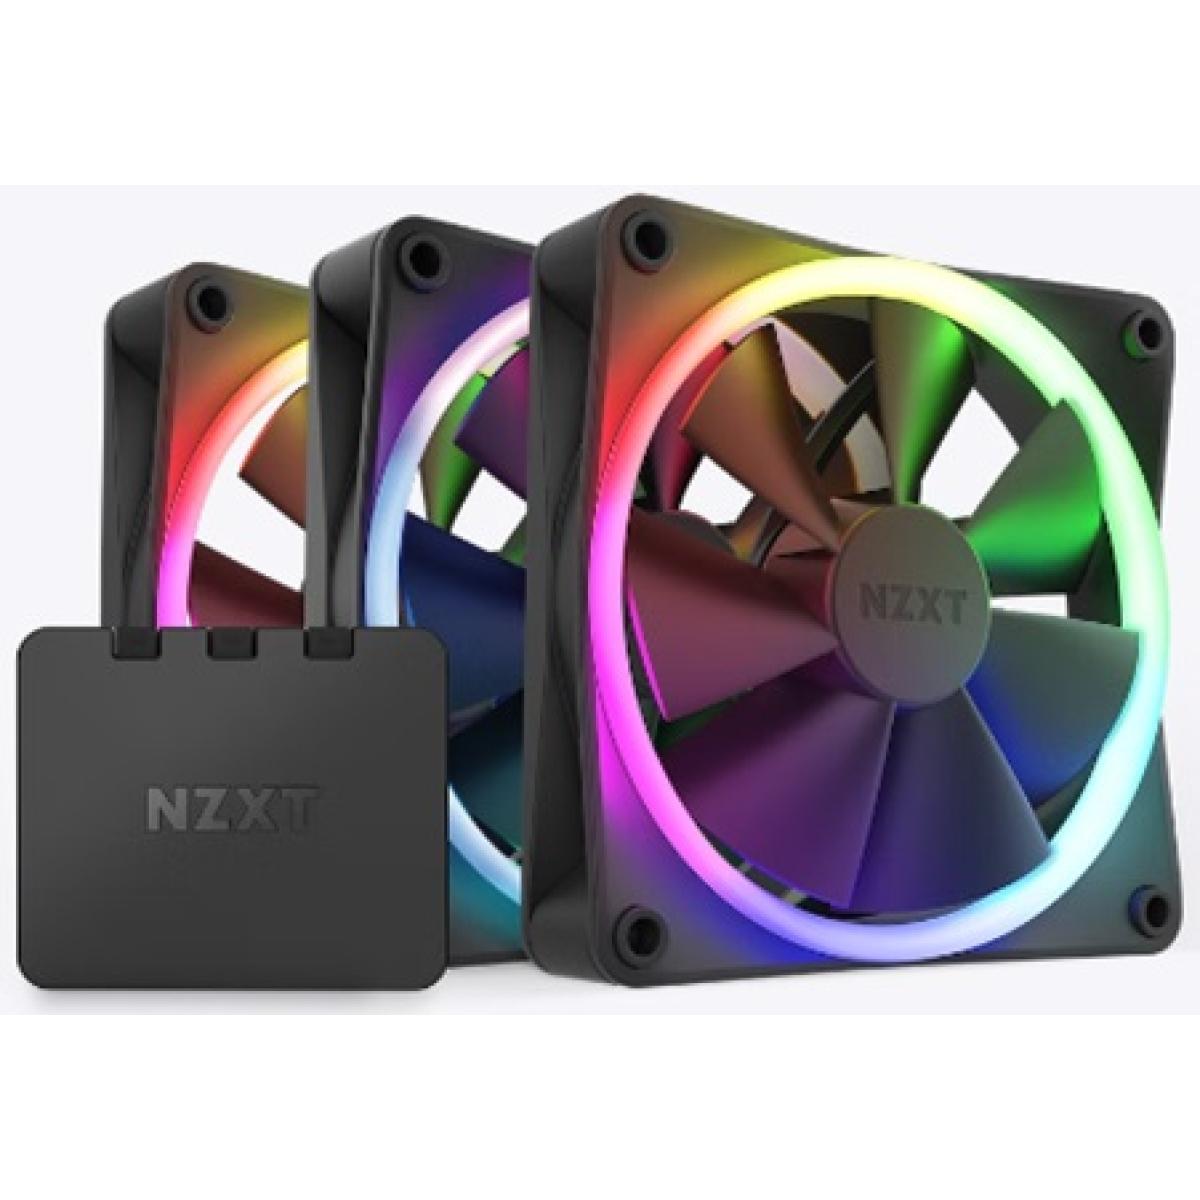 NZXT F120 RGB DUO 3IN1 (Black) PWM Airflow Fans & Controller, Fluid Dynamic Bearing (FDB) For Quiet & Cool Operations, Elegant Frame Design & Anti-Vibration Rubber Corners